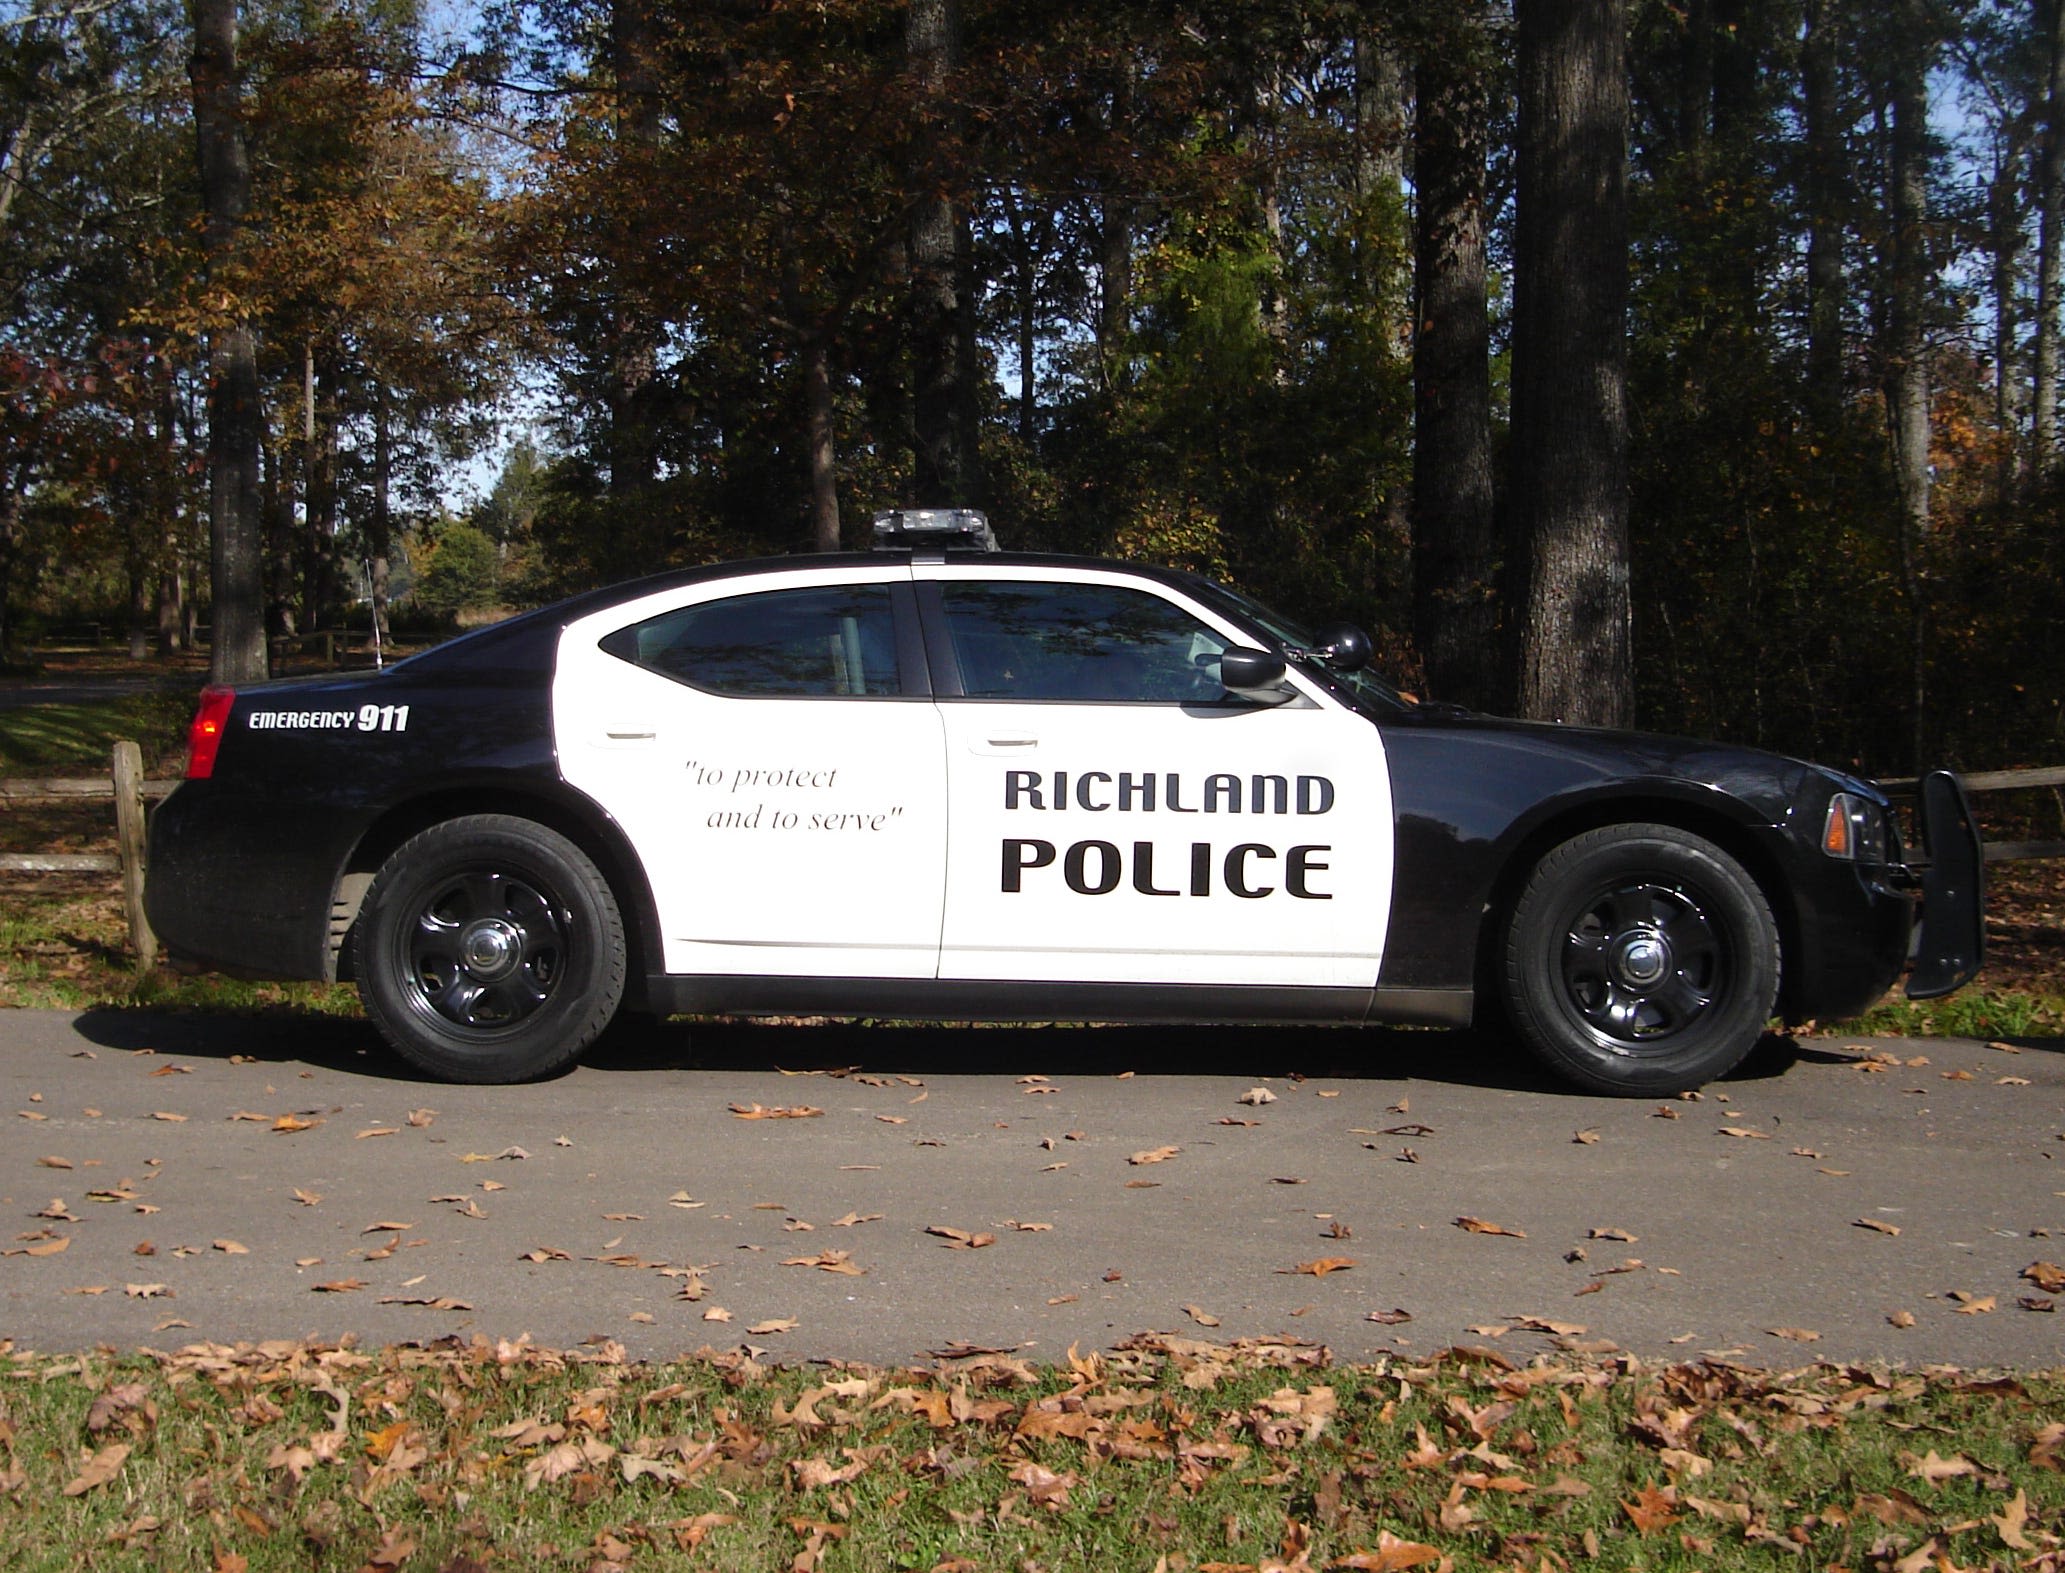 Richland police officer relieved of duty after video allegedly shows ‘derogatory slurs’